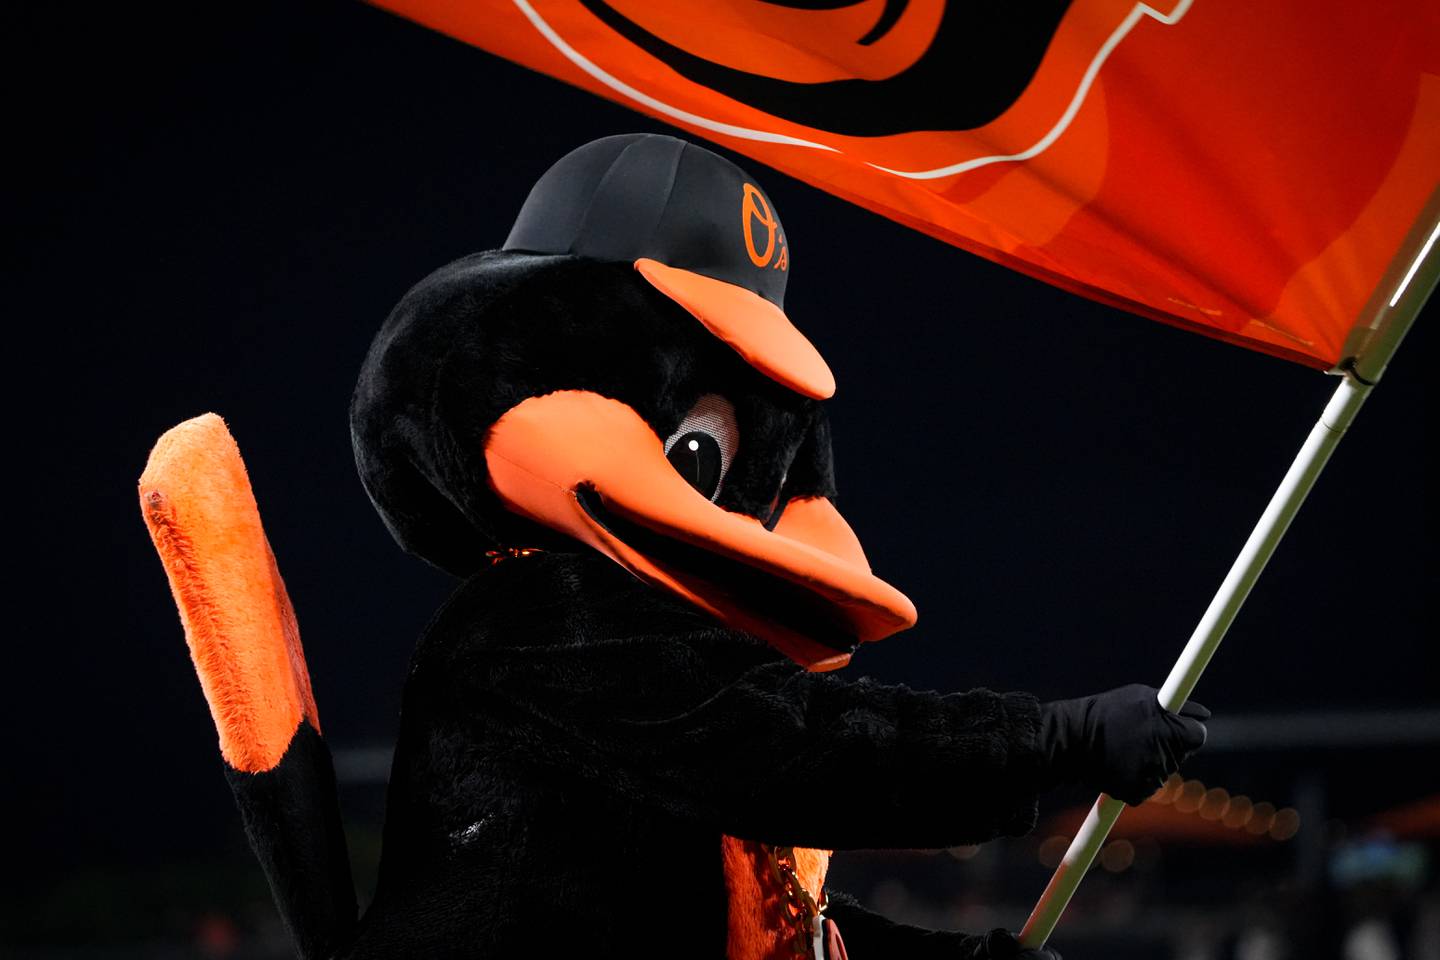 The Baltimore Oriole Bird waves his flag following a game at Camden Yards on Friday, April 21. The Orioles beat the Tigers, 2-1, on their way to sweeping the series.